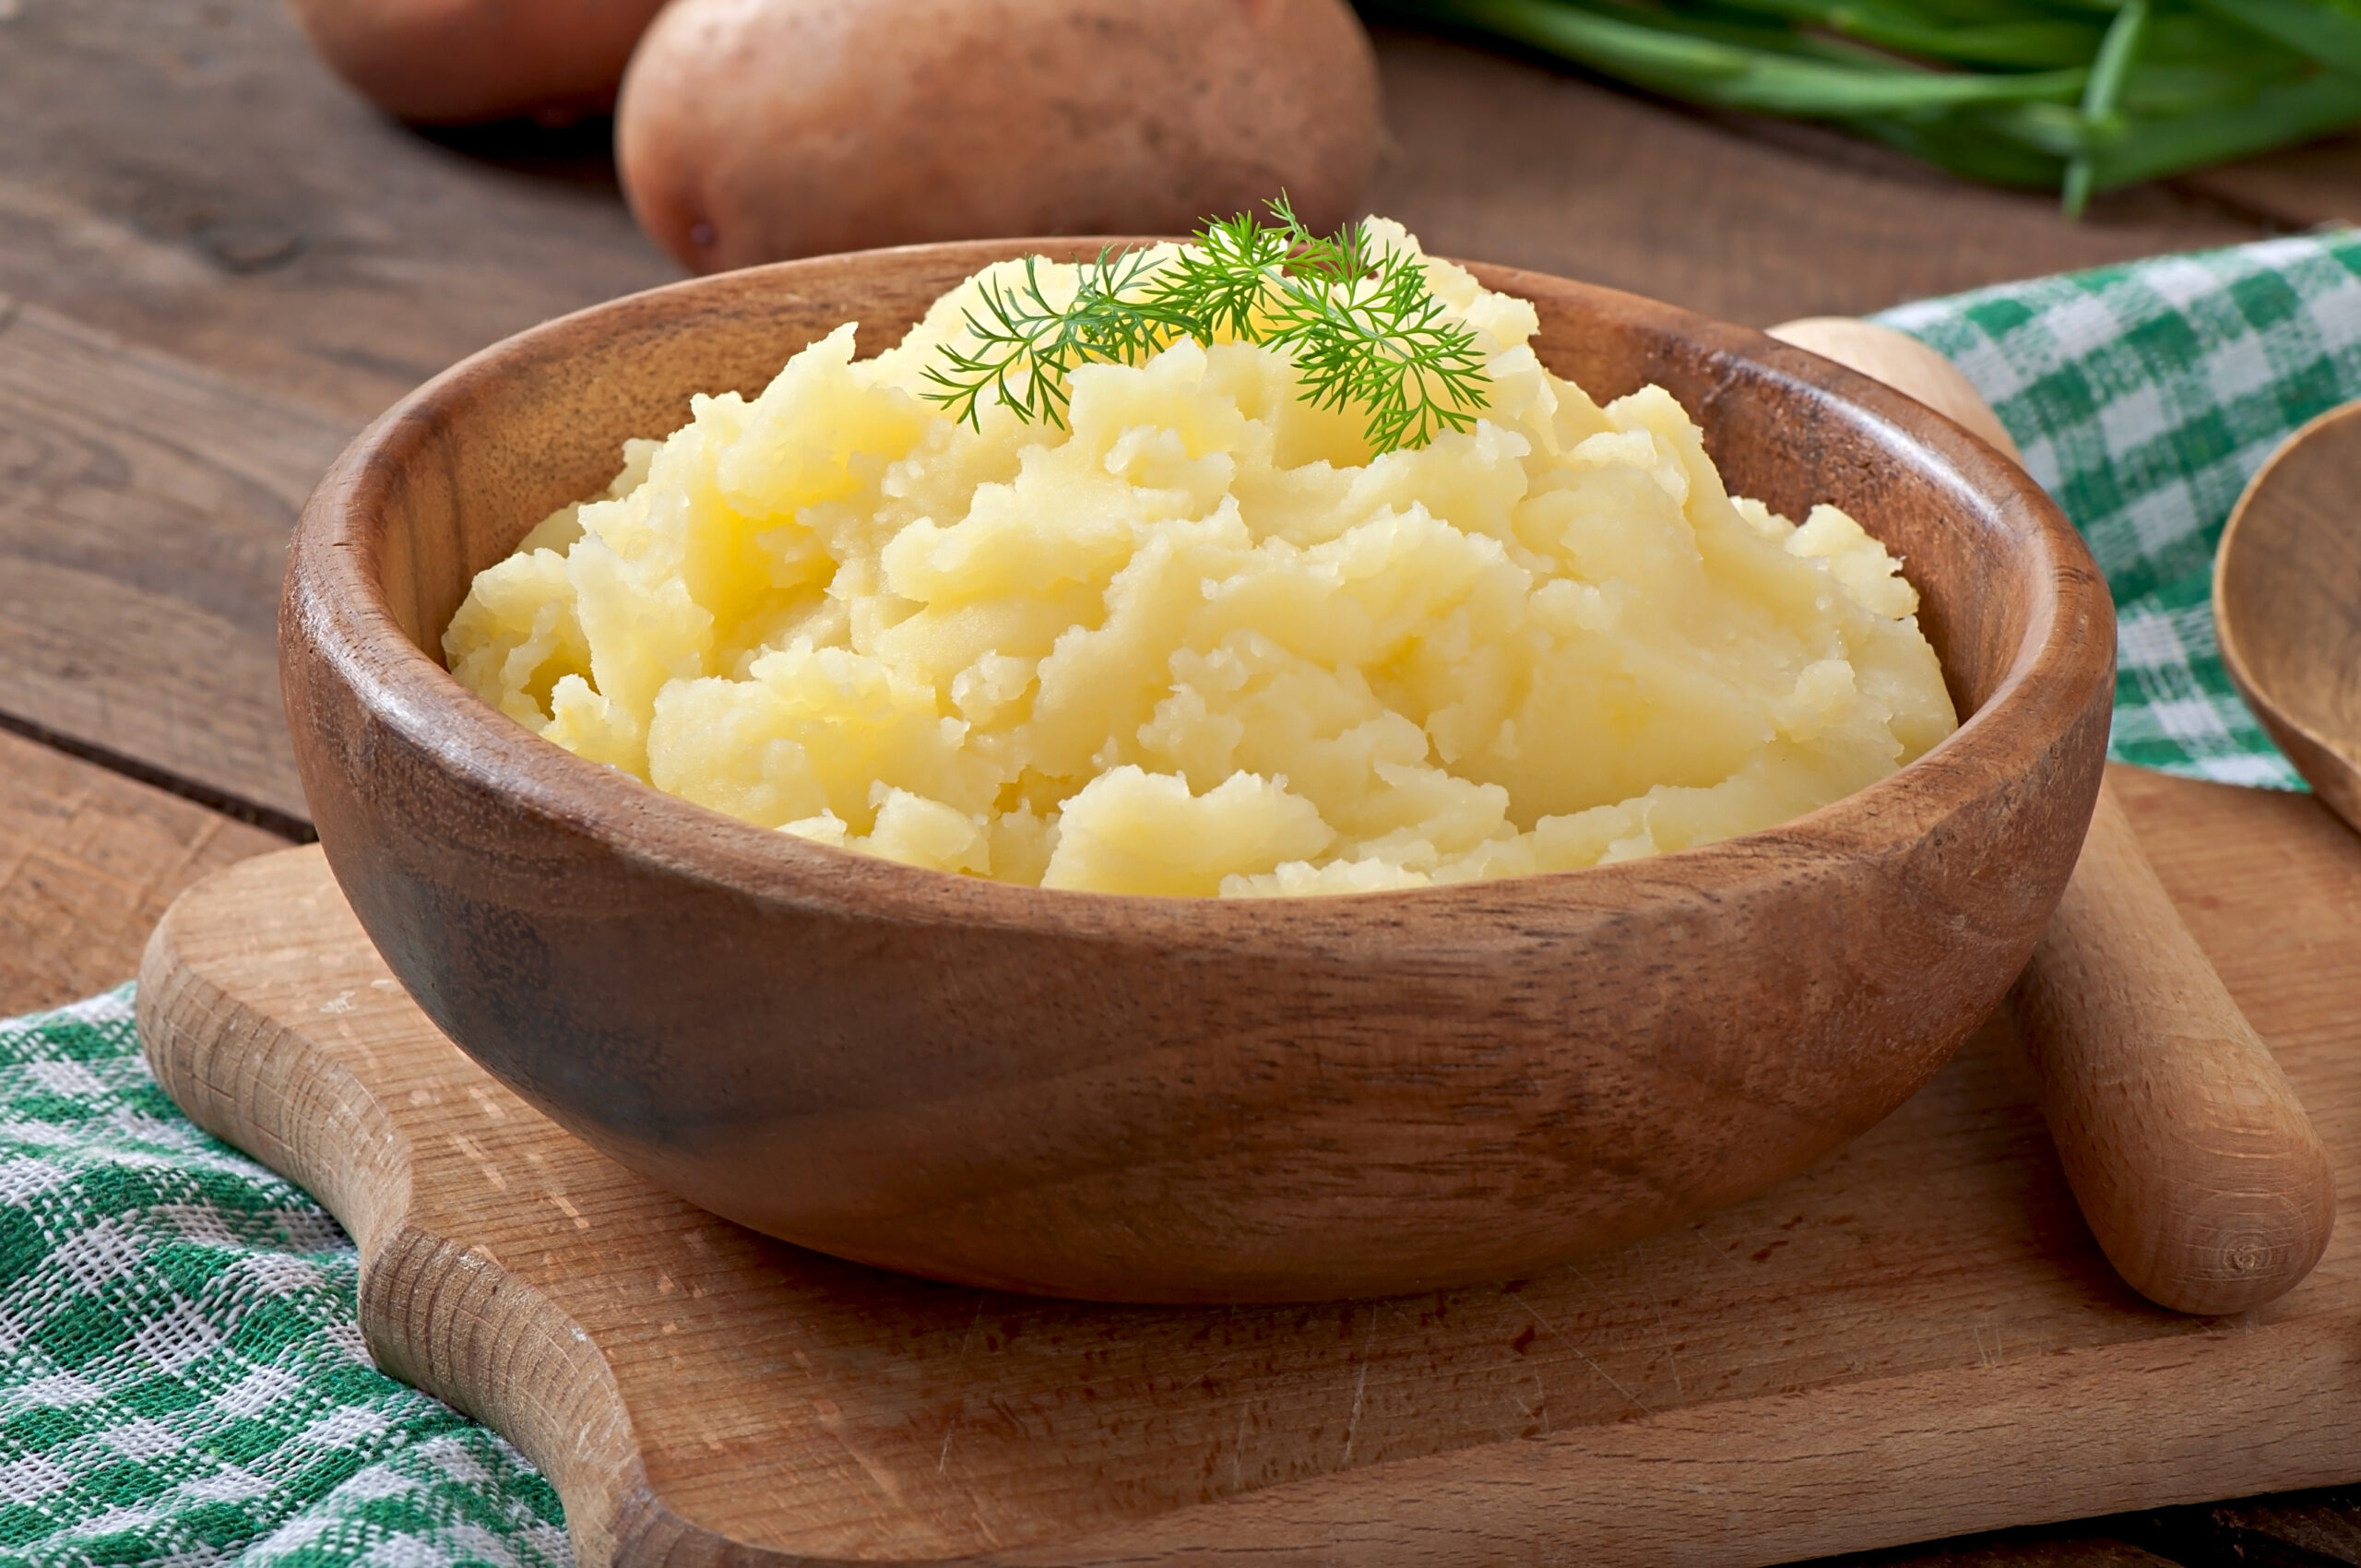  What-Goes-With-Mashed-Potatoes